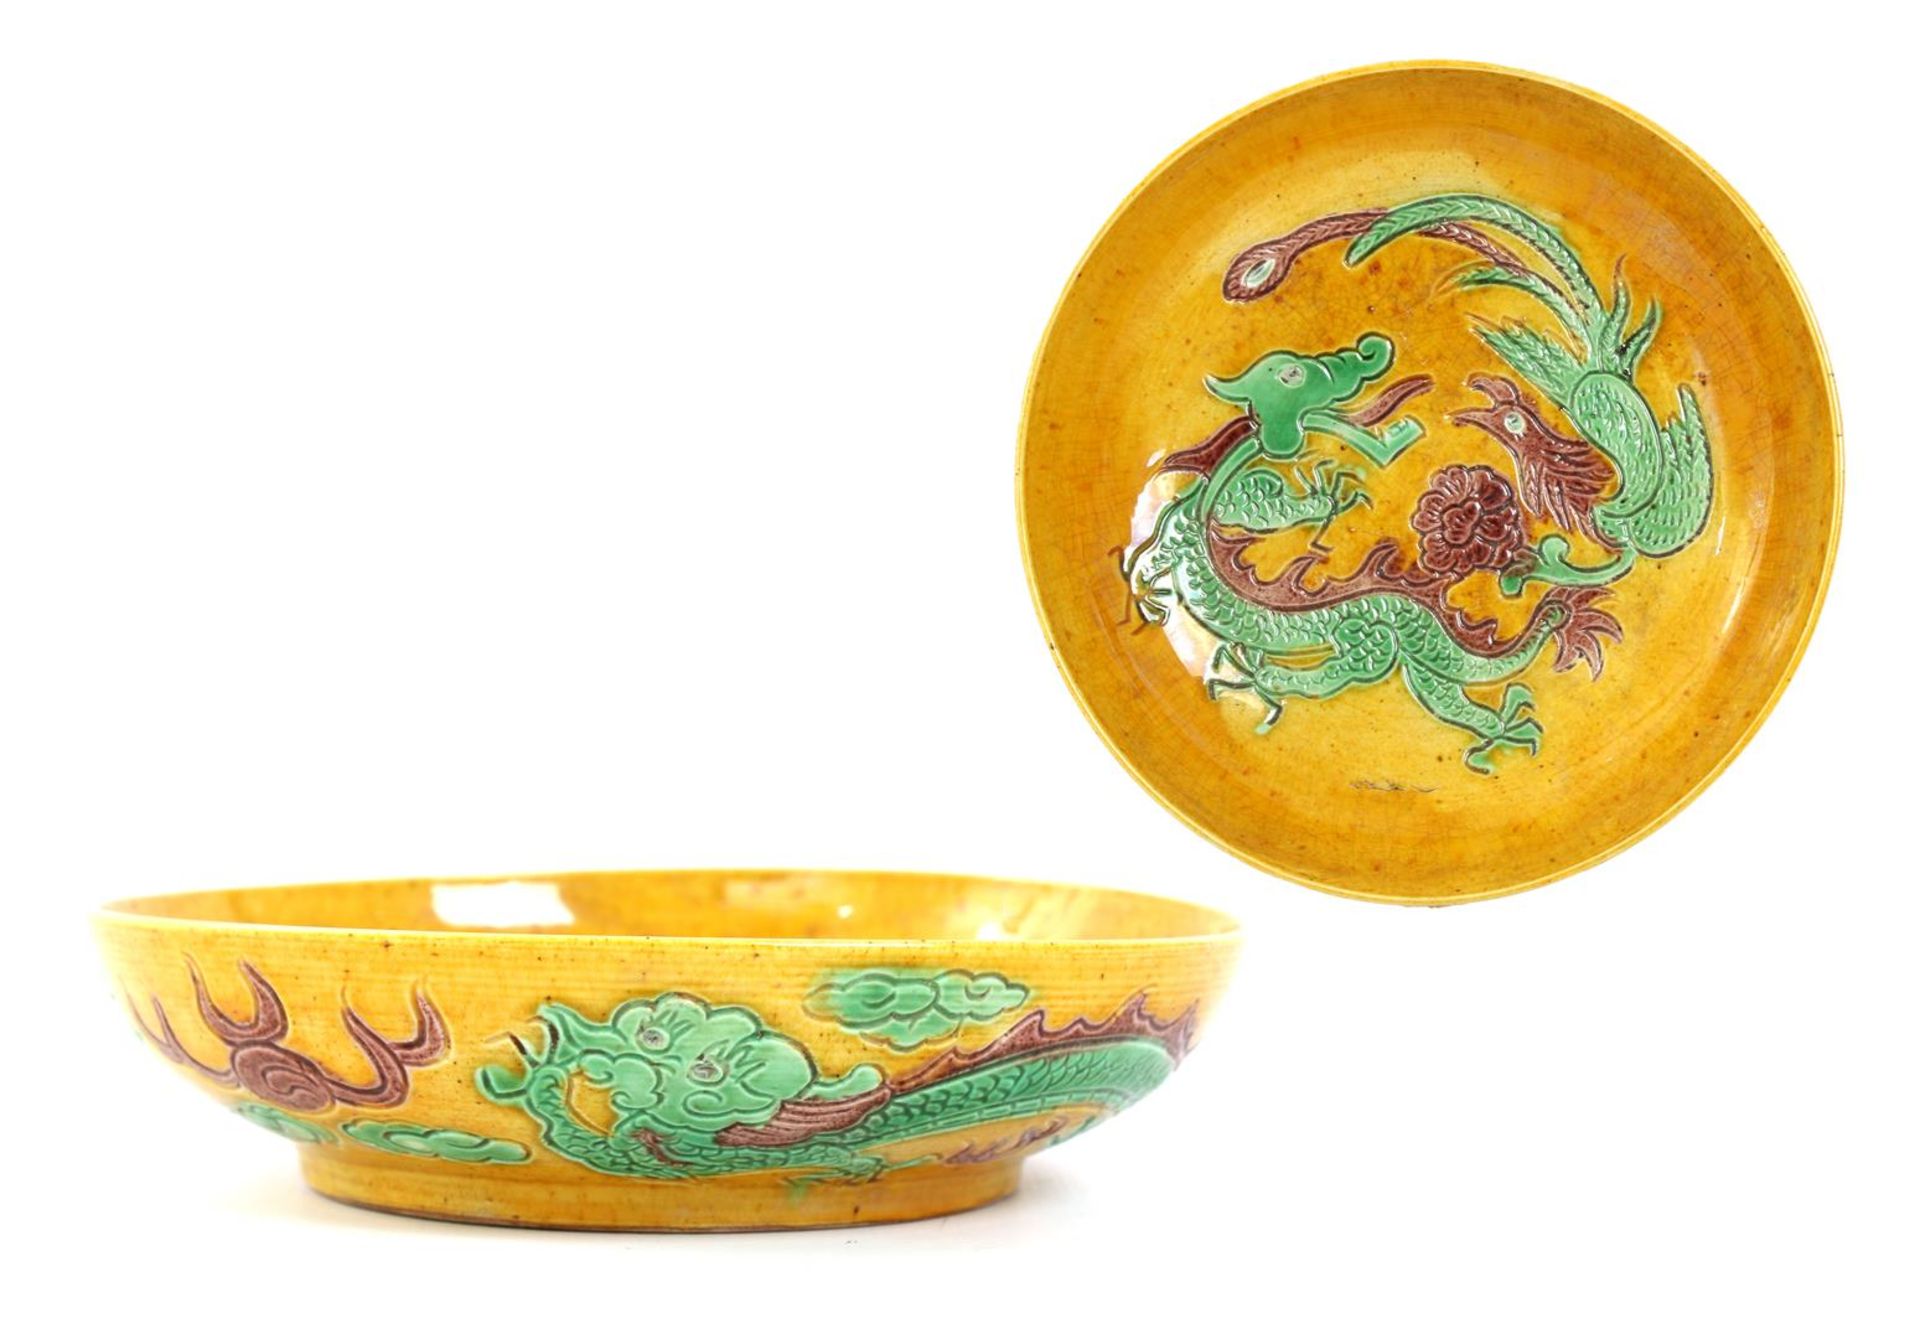 Porcelain dish with yellow-green decoration with dragon, 3.5 cm high, 13.5 cm diameter (crack line)